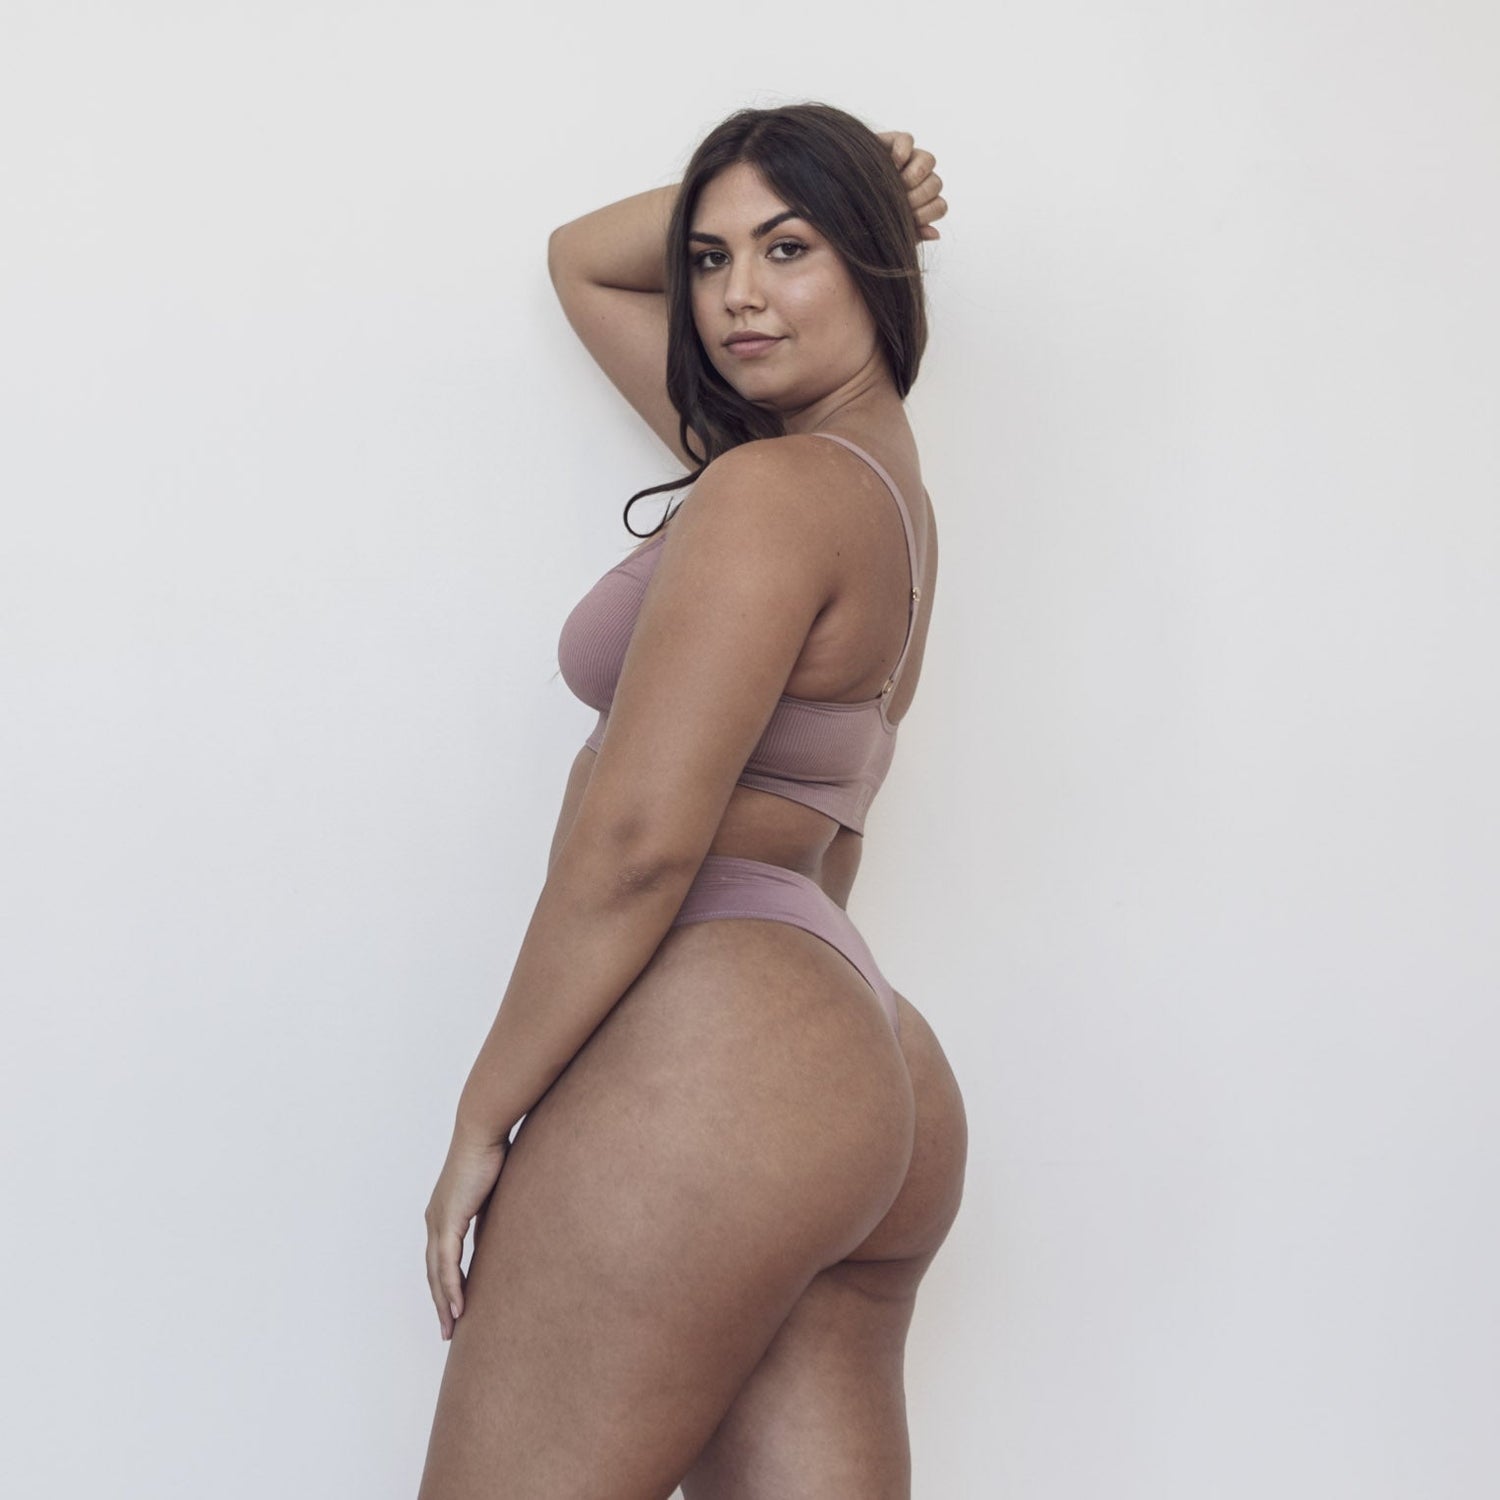 Sustainable bruised mauve high waist g-string by Underwear for Humanity: ethical, sustainable. sizes 6-26. Models wear high-waisted G -string underwear. underwear sits high on the waist, sits smooth on the body, made from Tencel and recycled materials.